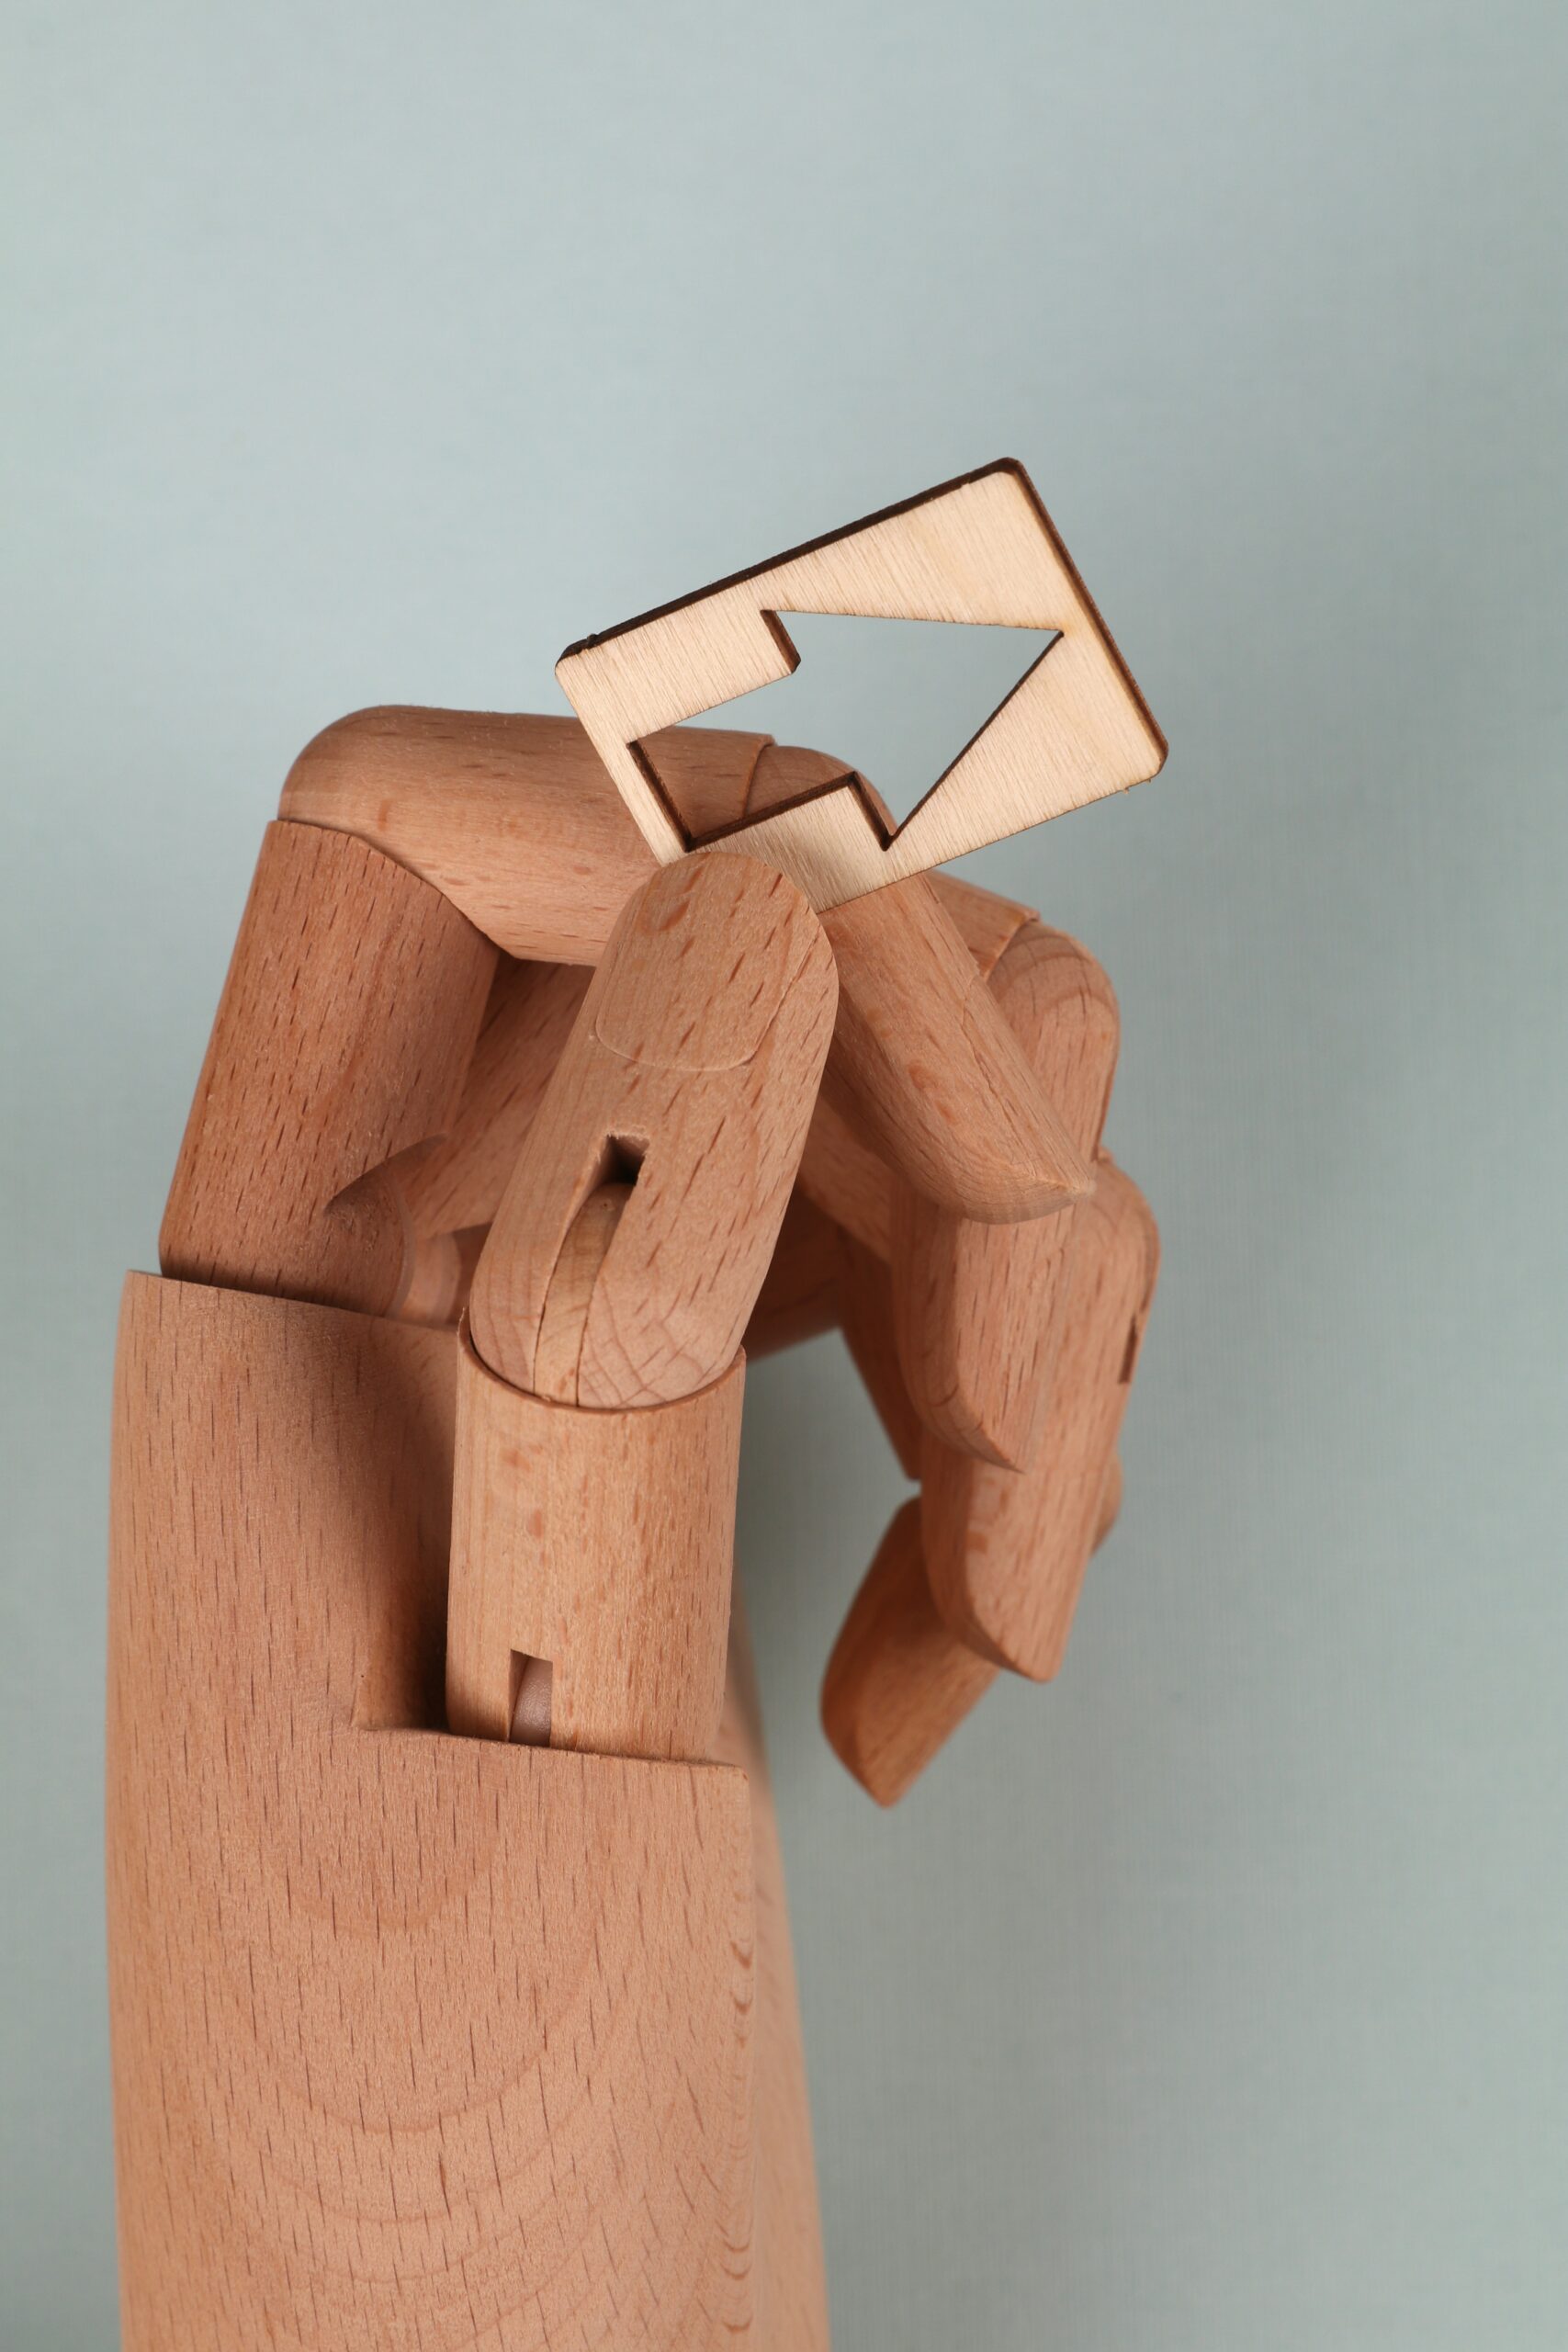 wood model robotic hand with cut out arrow